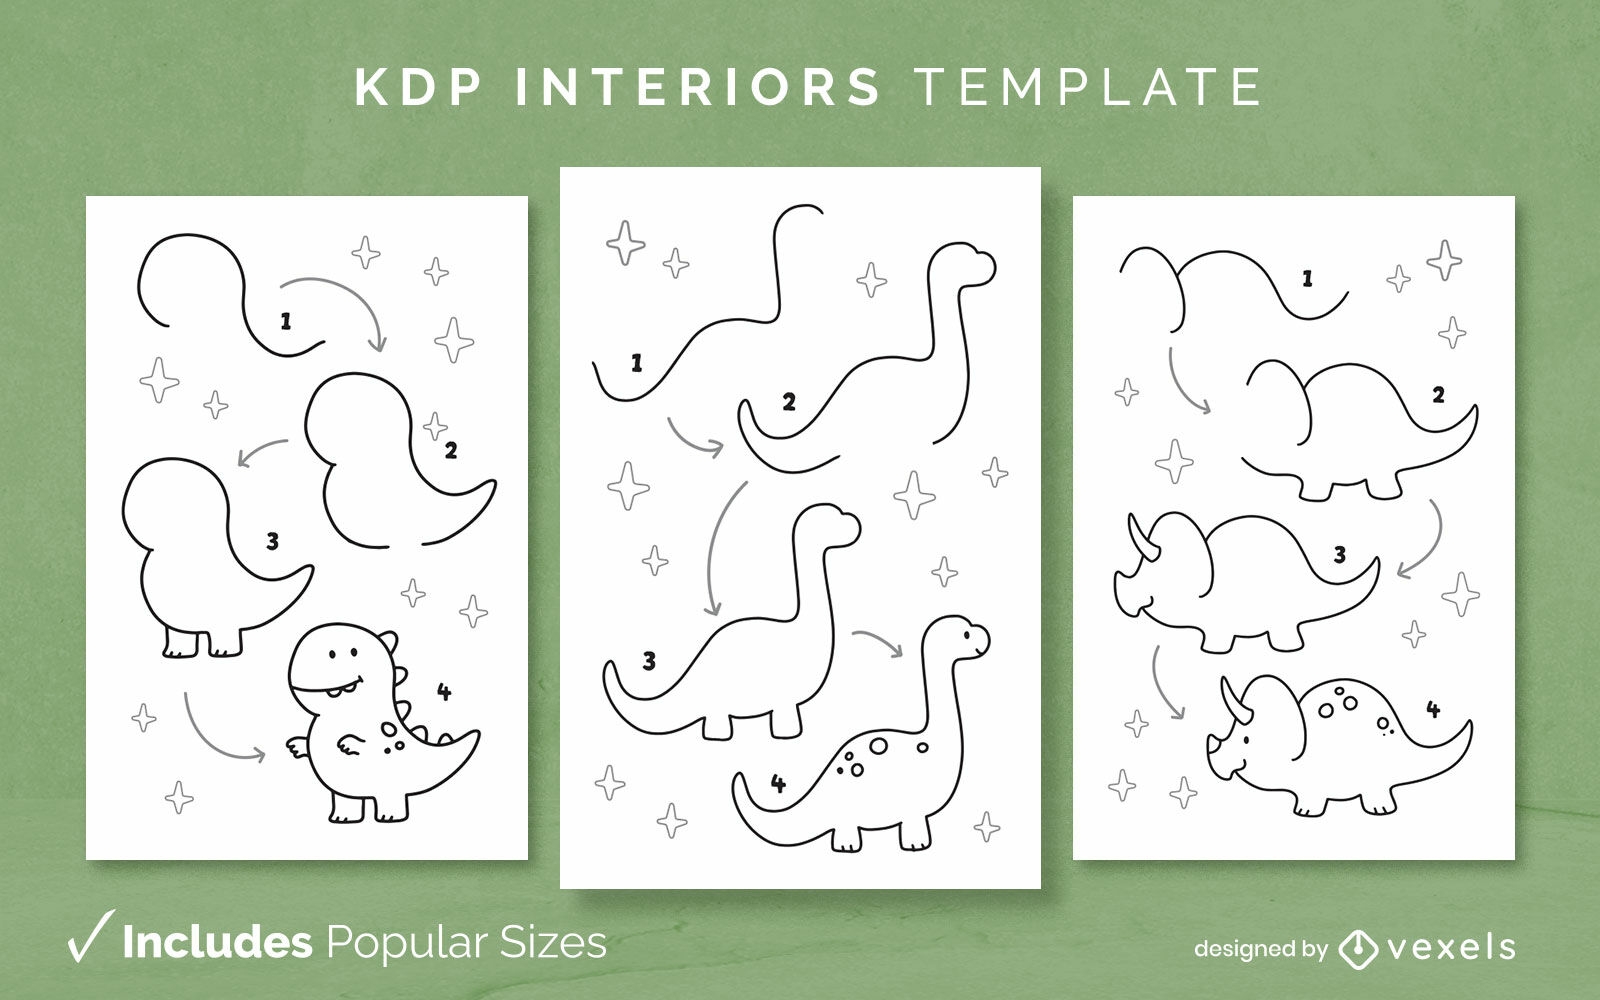 How to draw dinosaurs diary design template KDP